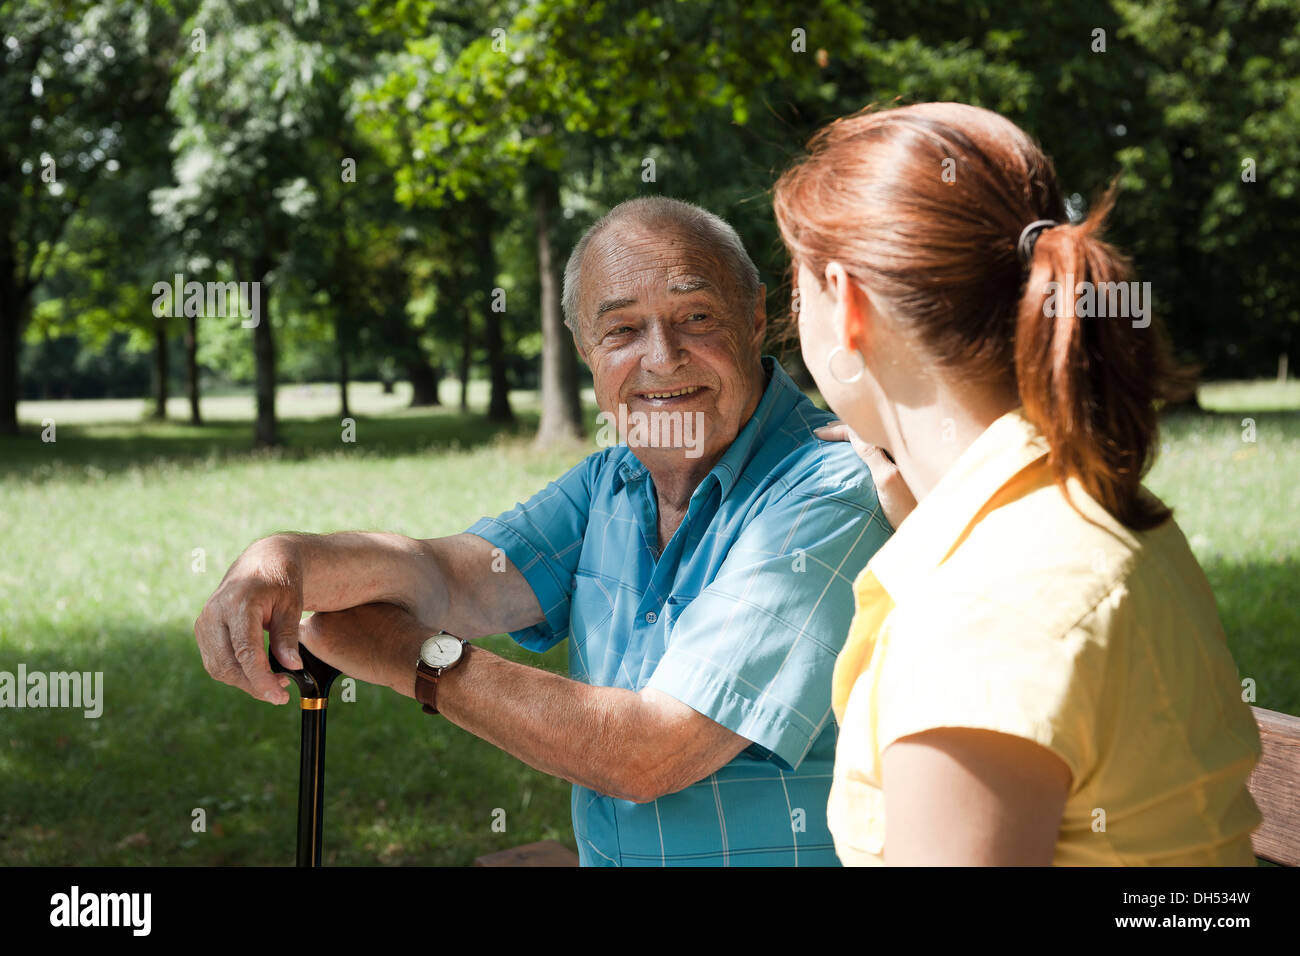 A women and an elderly man having a chat in a park Stock Photo